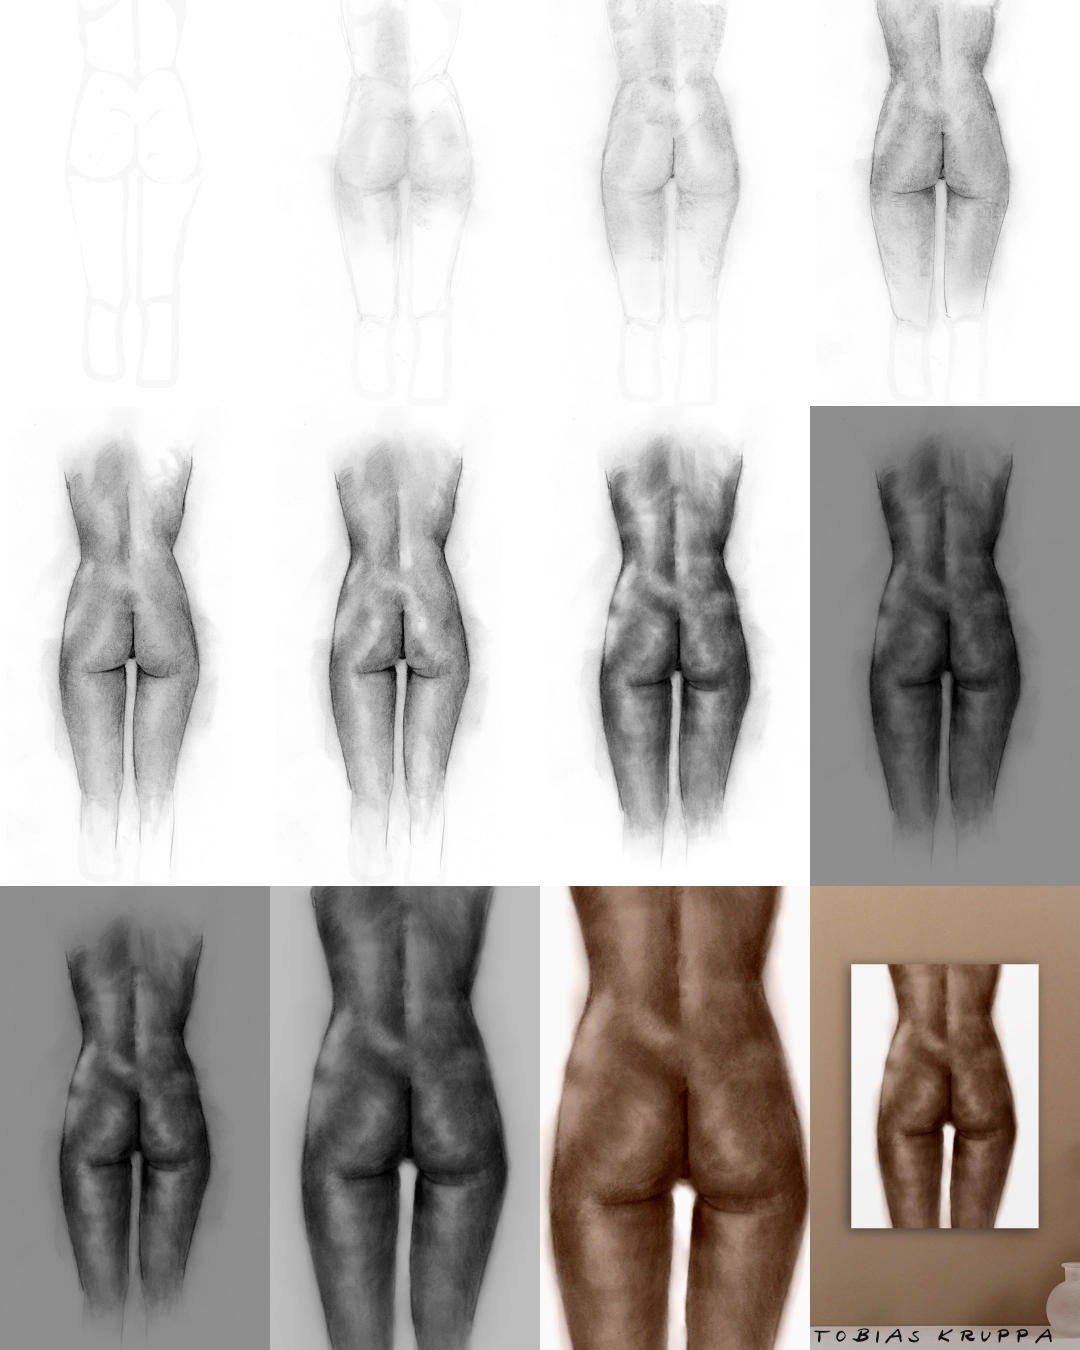 Artistic renderings of female bottoms in various shapes and sizes, depicted in fine art prints for elegant home decor